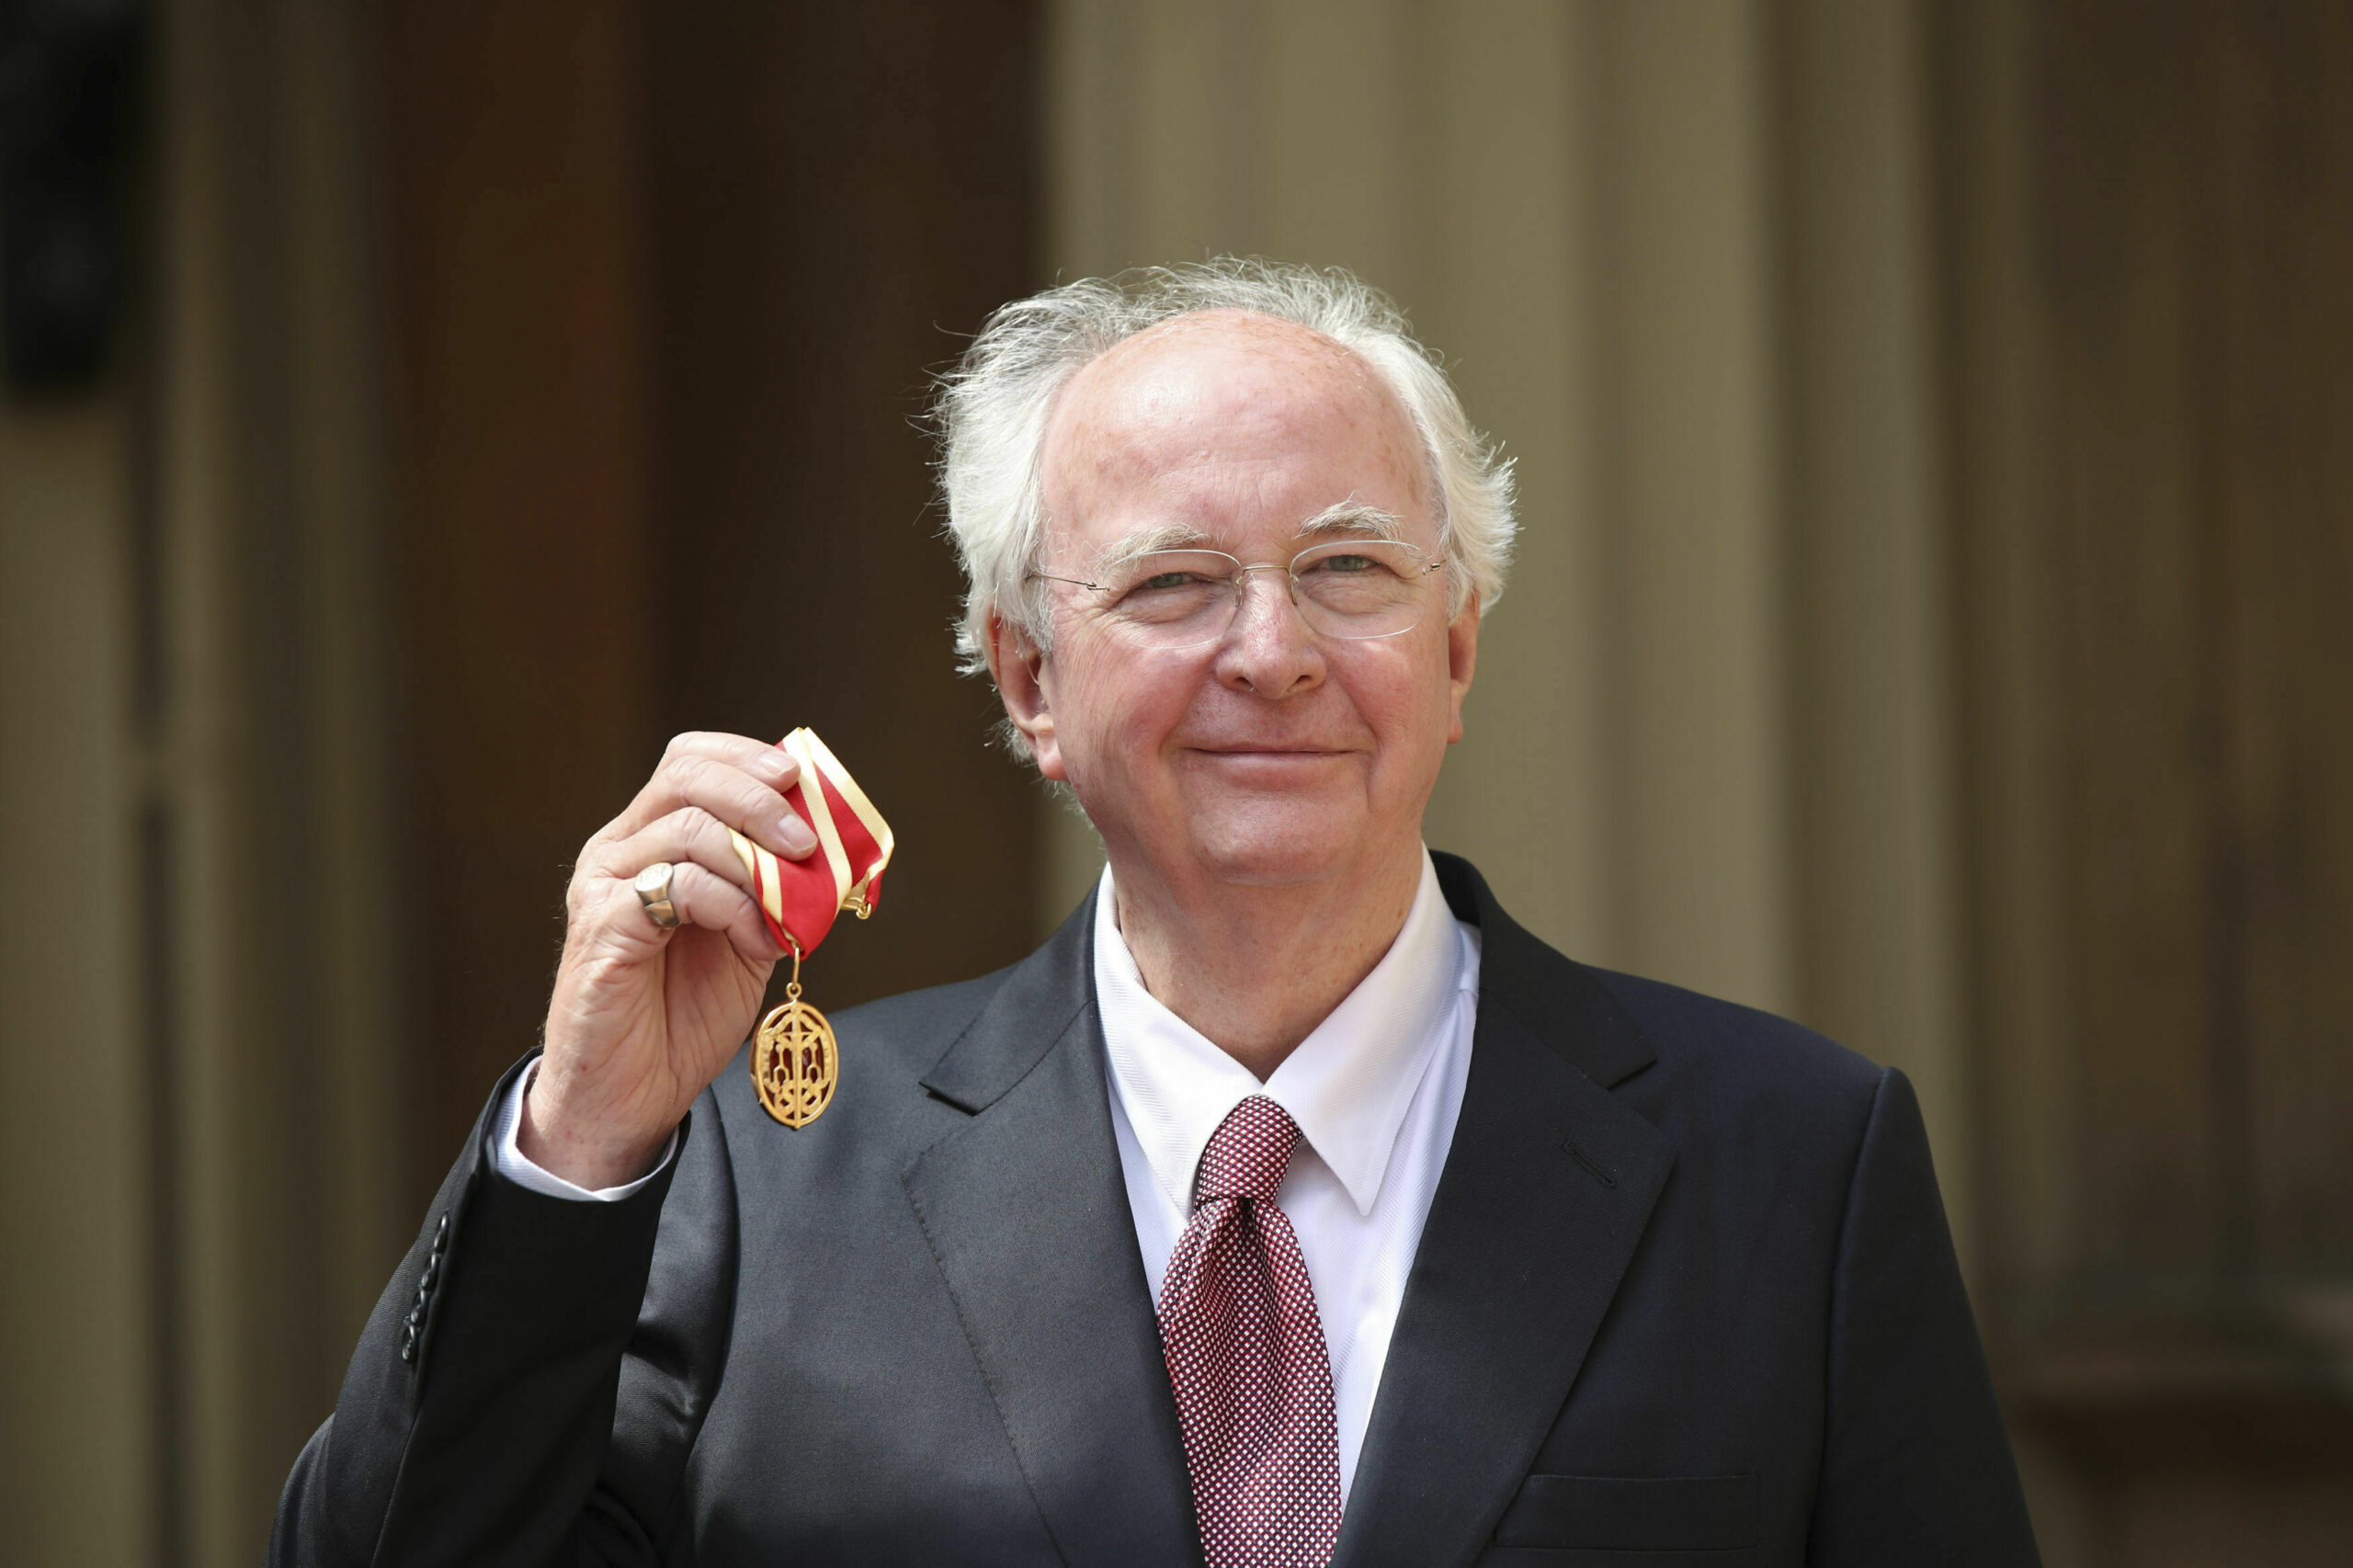 ‘His Dark Materials’ Author Philip Pullman On The Consciousness Of All Things